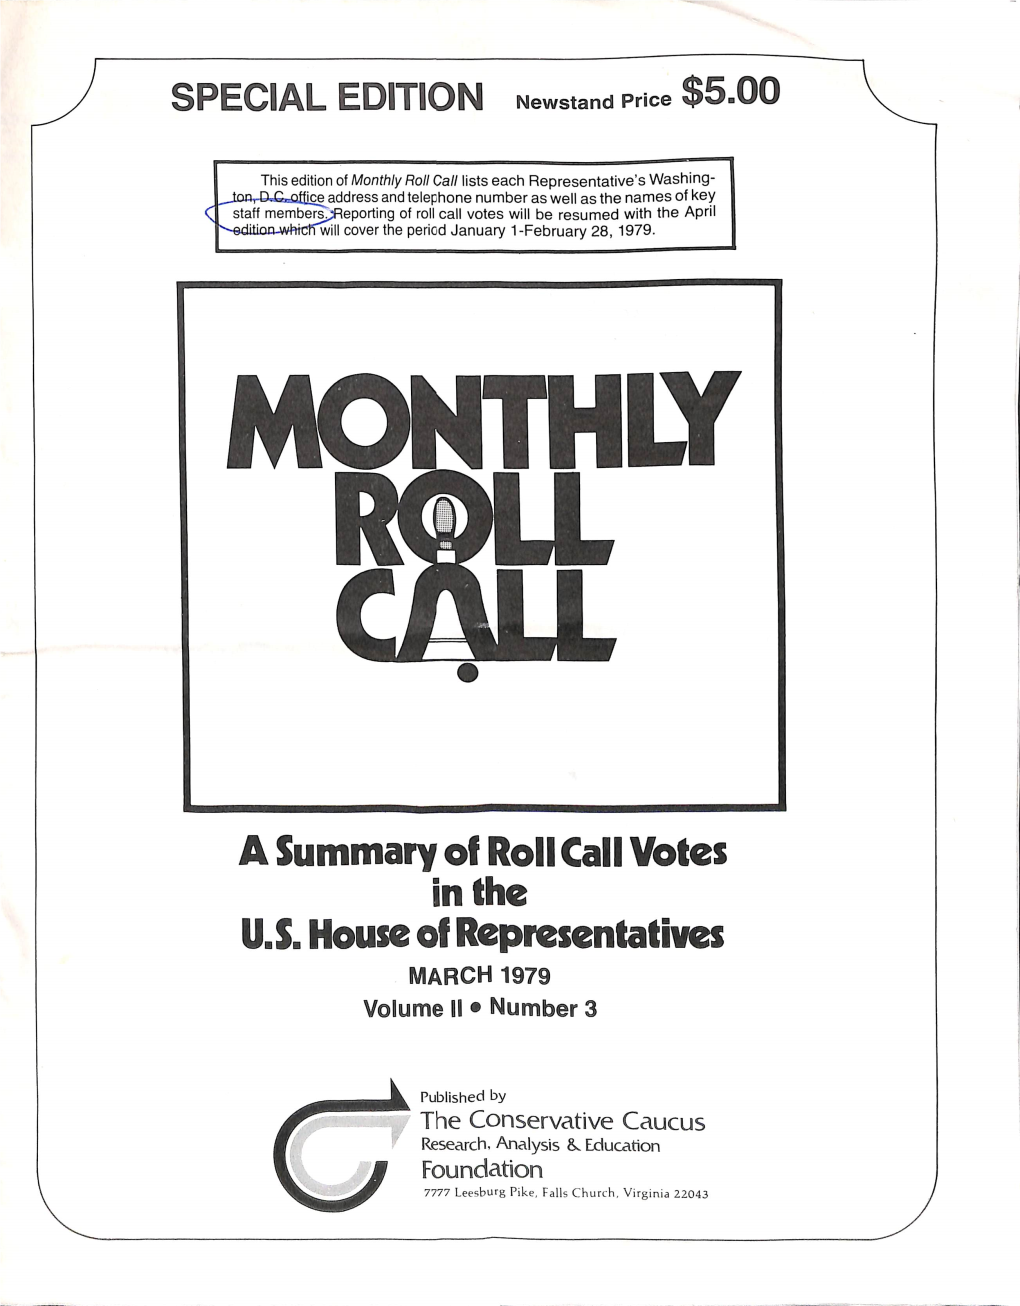 A Summary of Roll Call Votes in the U.S